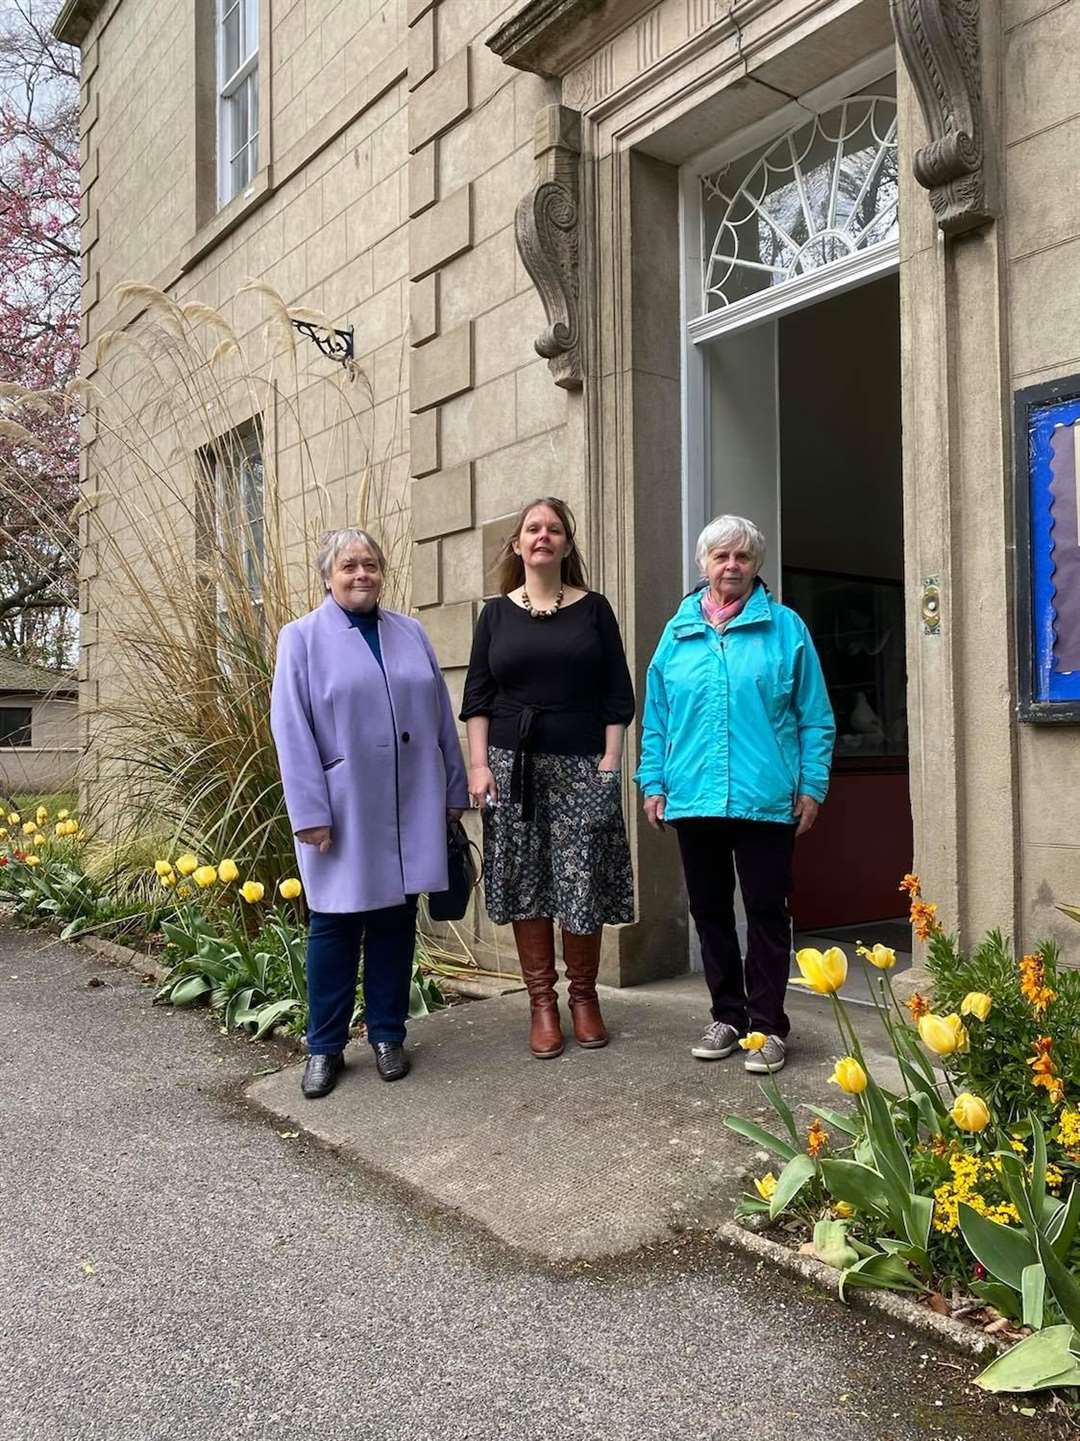 L to R Yvonne Cotter (Curator and Trustee), Melissa Davies (Museum Manager), Joan Andersen (Trustee).